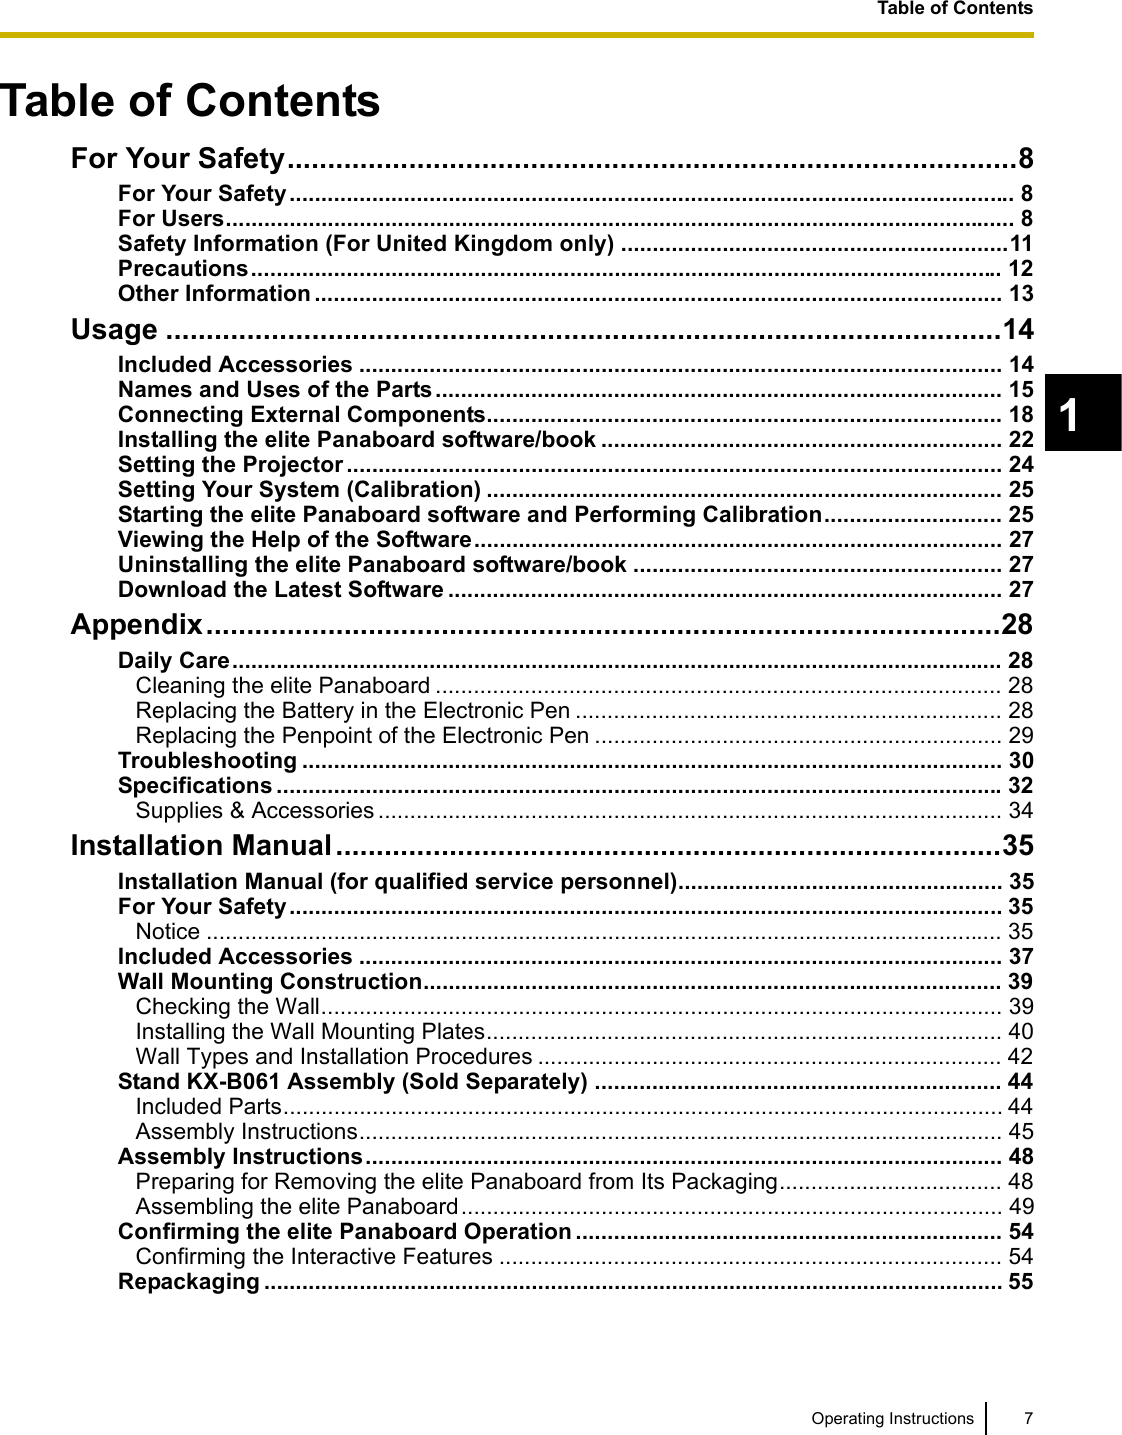 Table of Contents7Operating Instructions1Table of ContentsTable of ContentsFor Your Safety..........................................................................................8For Your Safety.................................................................................................................. 8For Users............................................................................................................................ 8Safety Information (For United Kingdom only) .............................................................11Precautions...................................................................................................................... 12Other Information ............................................................................................................ 13Usage .......................................................................................................14Included Accessories ..................................................................................................... 14Names and Uses of the Parts......................................................................................... 15Connecting External Components................................................................................. 18Installing the elite Panaboard software/book ............................................................... 22Setting the Projector ....................................................................................................... 24Setting Your System (Calibration) ................................................................................. 25Starting the elite Panaboard software and Performing Calibration............................ 25Viewing the Help of the Software................................................................................... 27Uninstalling the elite Panaboard software/book .......................................................... 27Download the Latest Software ....................................................................................... 27Appendix..................................................................................................28Daily Care......................................................................................................................... 28Cleaning the elite Panaboard ......................................................................................... 28Replacing the Battery in the Electronic Pen ................................................................... 28Replacing the Penpoint of the Electronic Pen ................................................................ 29Troubleshooting .............................................................................................................. 30Specifications ..................................................................................................................32Supplies &amp; Accessories .................................................................................................. 34Installation Manual..................................................................................35Installation Manual (for qualified service personnel)................................................... 35For Your Safety................................................................................................................ 35Notice ............................................................................................................................. 35Included Accessories ..................................................................................................... 37Wall Mounting Construction........................................................................................... 39Checking the Wall........................................................................................................... 39Installing the Wall Mounting Plates................................................................................. 40Wall Types and Installation Procedures ......................................................................... 42Stand KX-B061 Assembly (Sold Separately) ................................................................ 44Included Parts................................................................................................................. 44Assembly Instructions..................................................................................................... 45Assembly Instructions.................................................................................................... 48Preparing for Removing the elite Panaboard from Its Packaging................................... 48Assembling the elite Panaboard..................................................................................... 49Confirming the elite Panaboard Operation ................................................................... 54Confirming the Interactive Features ............................................................................... 54Repackaging .................................................................................................................... 55